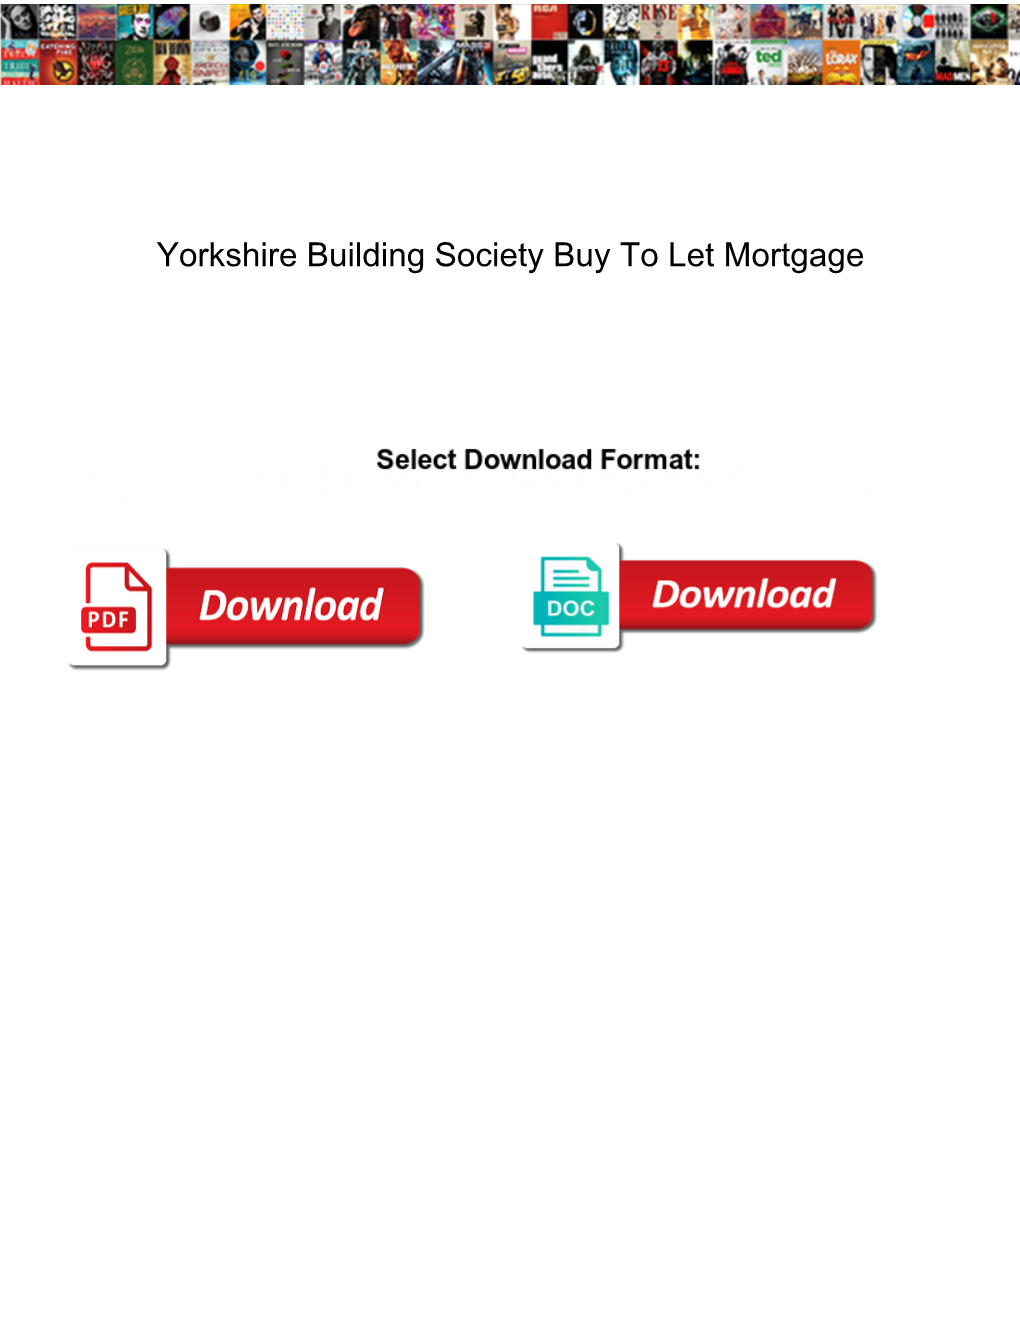 Yorkshire Building Society Buy to Let Mortgage